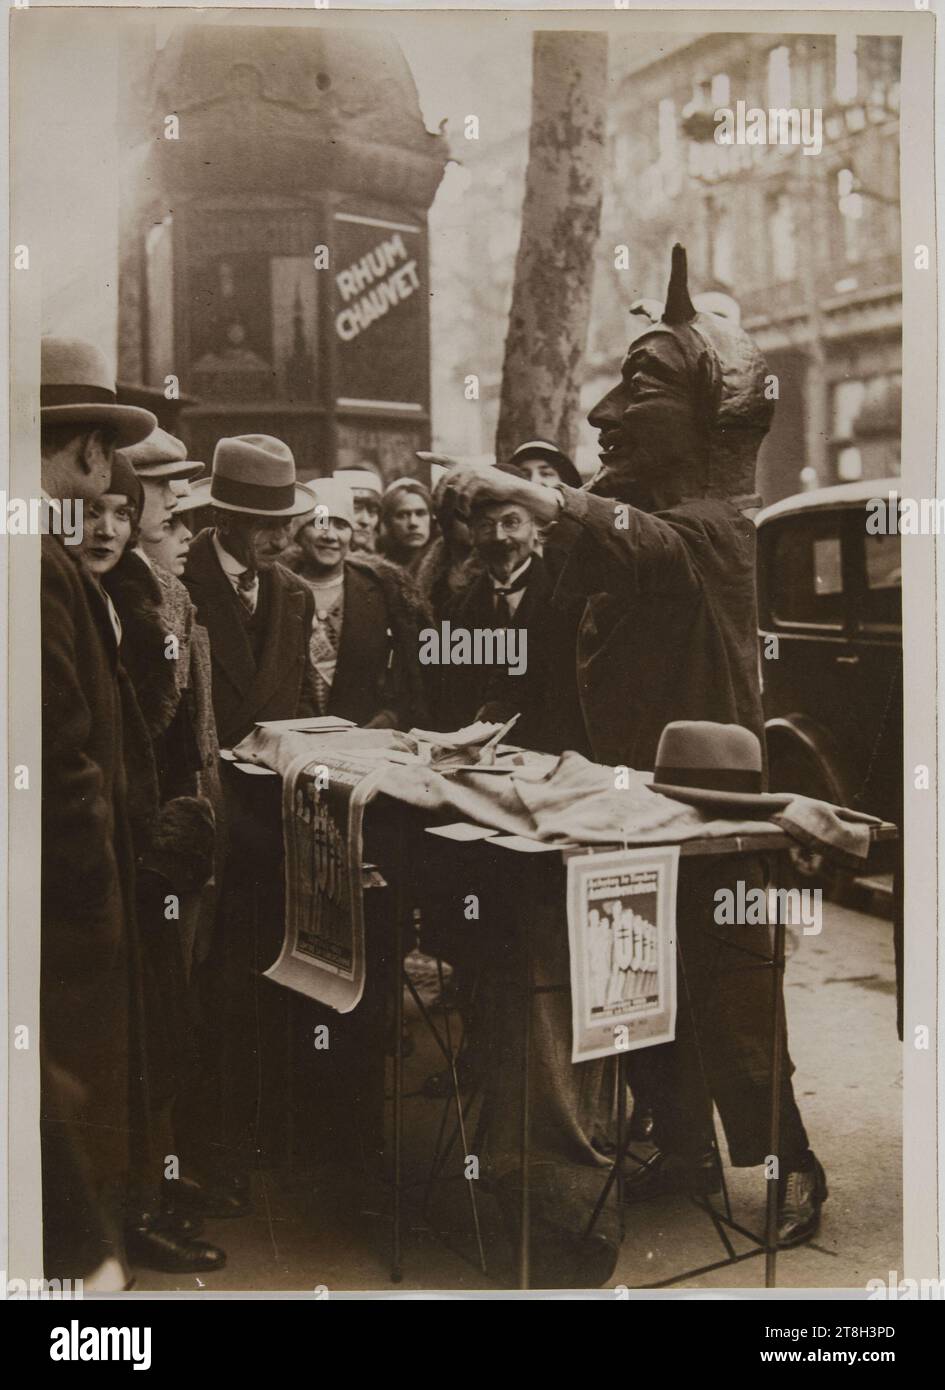 Patter contest by street vendors on the Grands Boulevards, for the benefit of the sale of the anti-tuberculosis stamp, Paris, Agence Rol G. Devred, Photographe, En 14-12-1930, Photography, Graphic arts, Photography, Gelatino silver bromide print, Dimensions - Work: Height: 17.8 cm, Width: 12 cm, Dimensions - Margin:, Height: 17.9 cm, Width: 13 cm Stock Photo